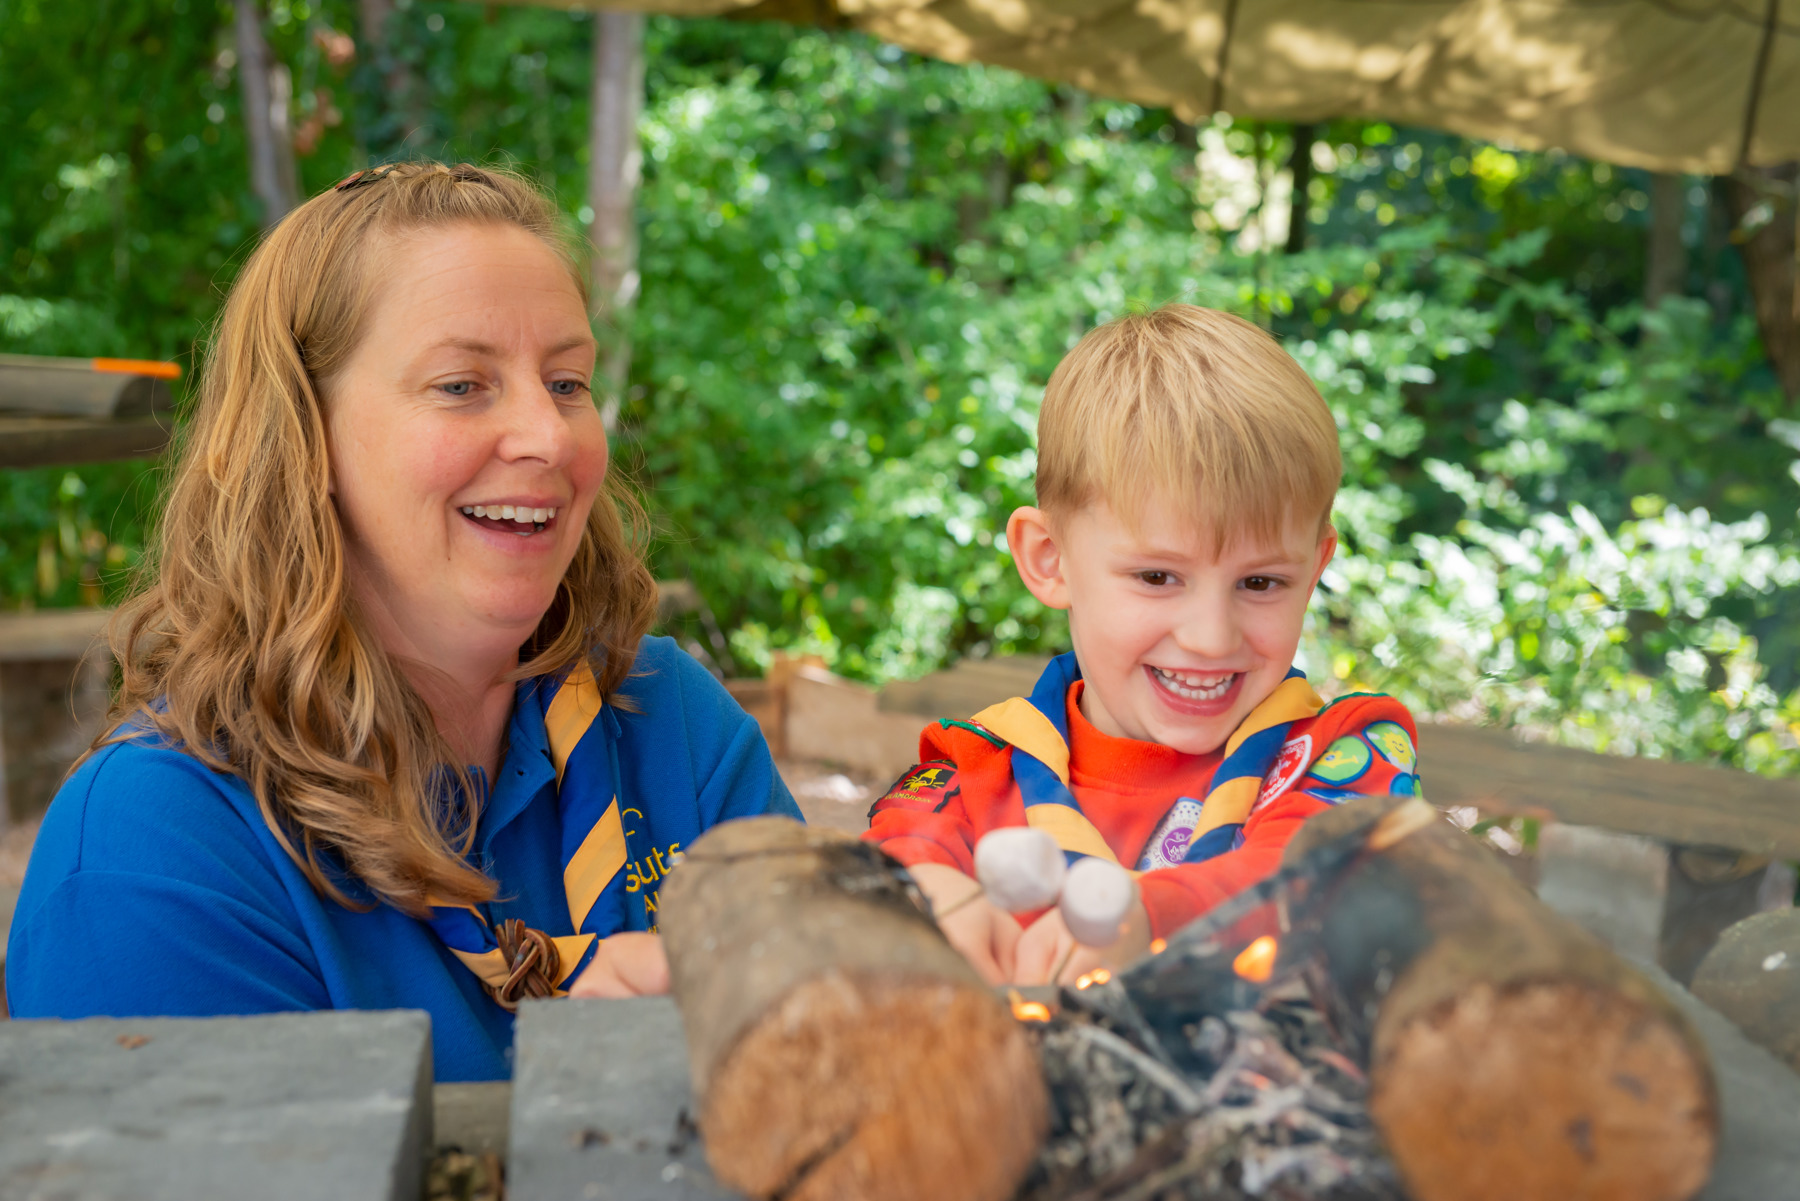 Louise, a Squirrels volunteer, is wearing a blue polo shirt with a necker while helping her son, George, in Squirrels uniform, toast marshmallows. They're both looking at the marshmallows and smiling.